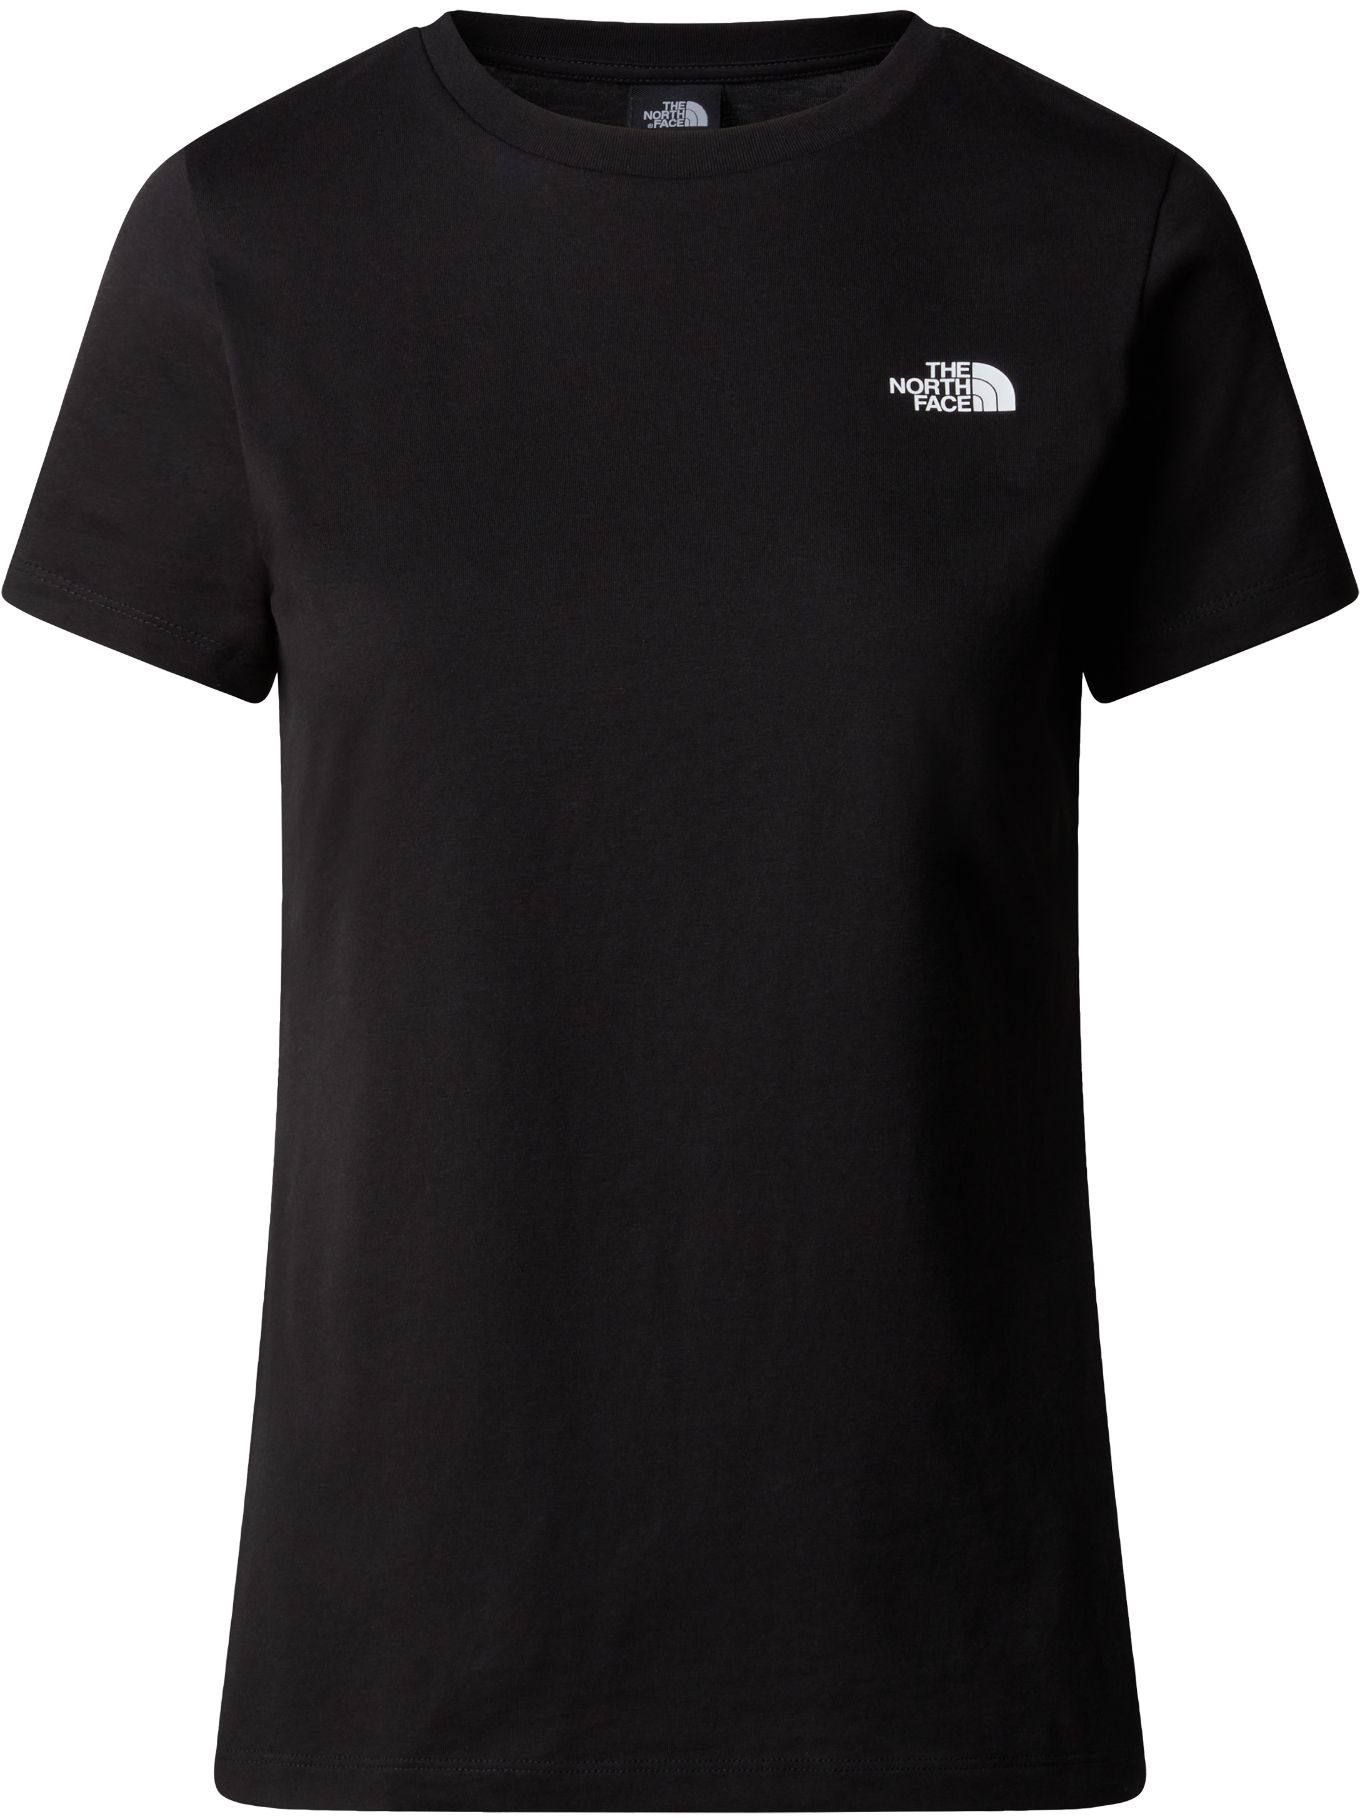 The North Face Women’s Simple Dome Tee